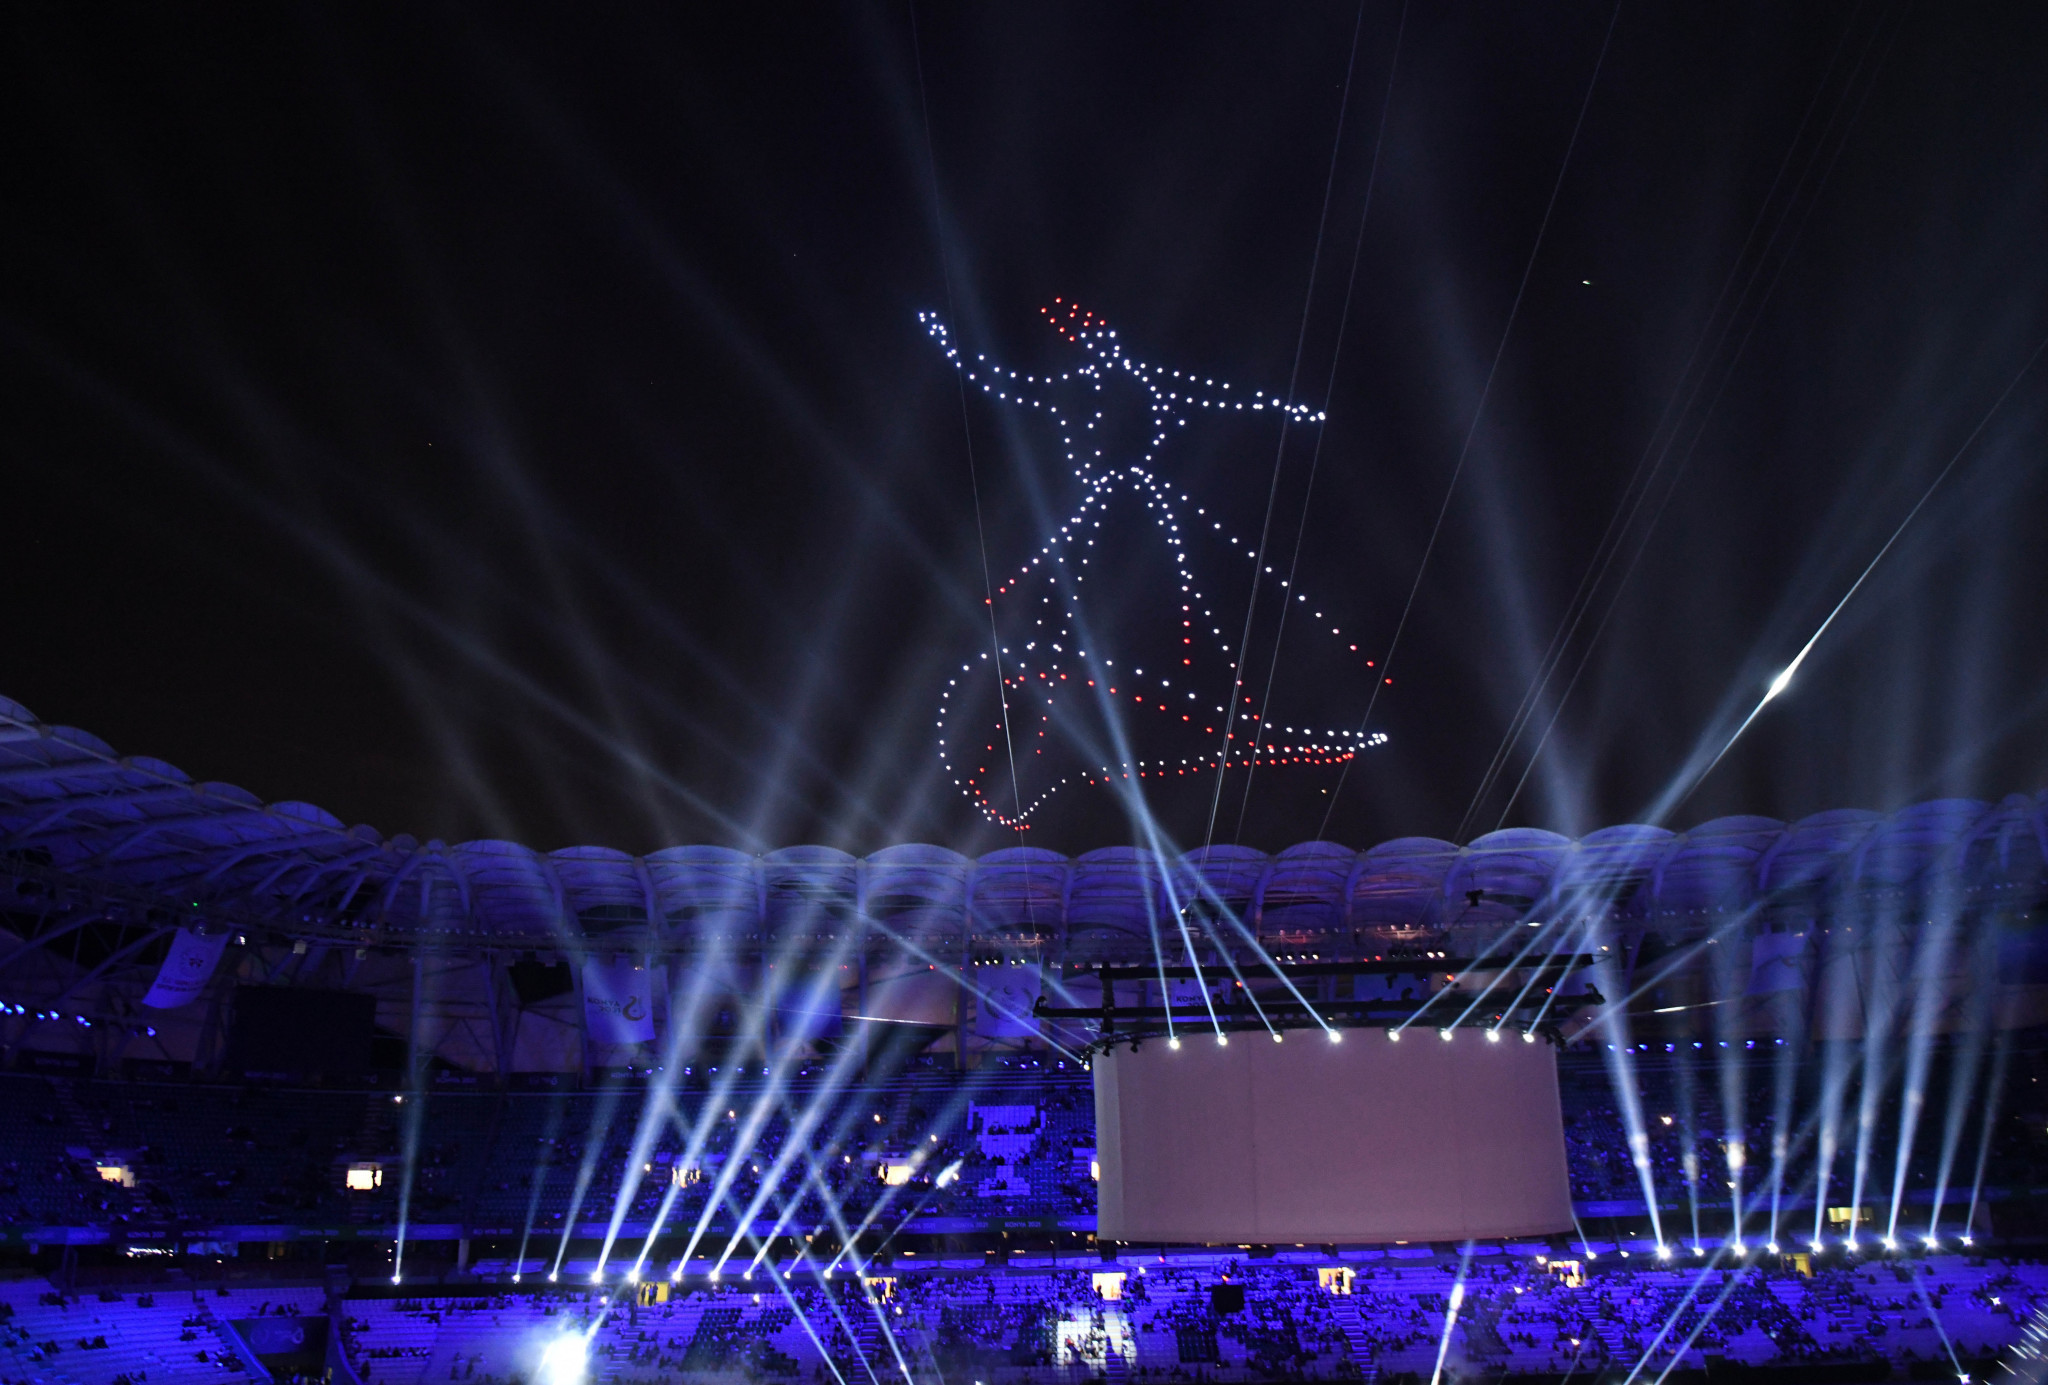 Drones came to together to form a whirling Dervish spinning above the stadium ©Konya 2021